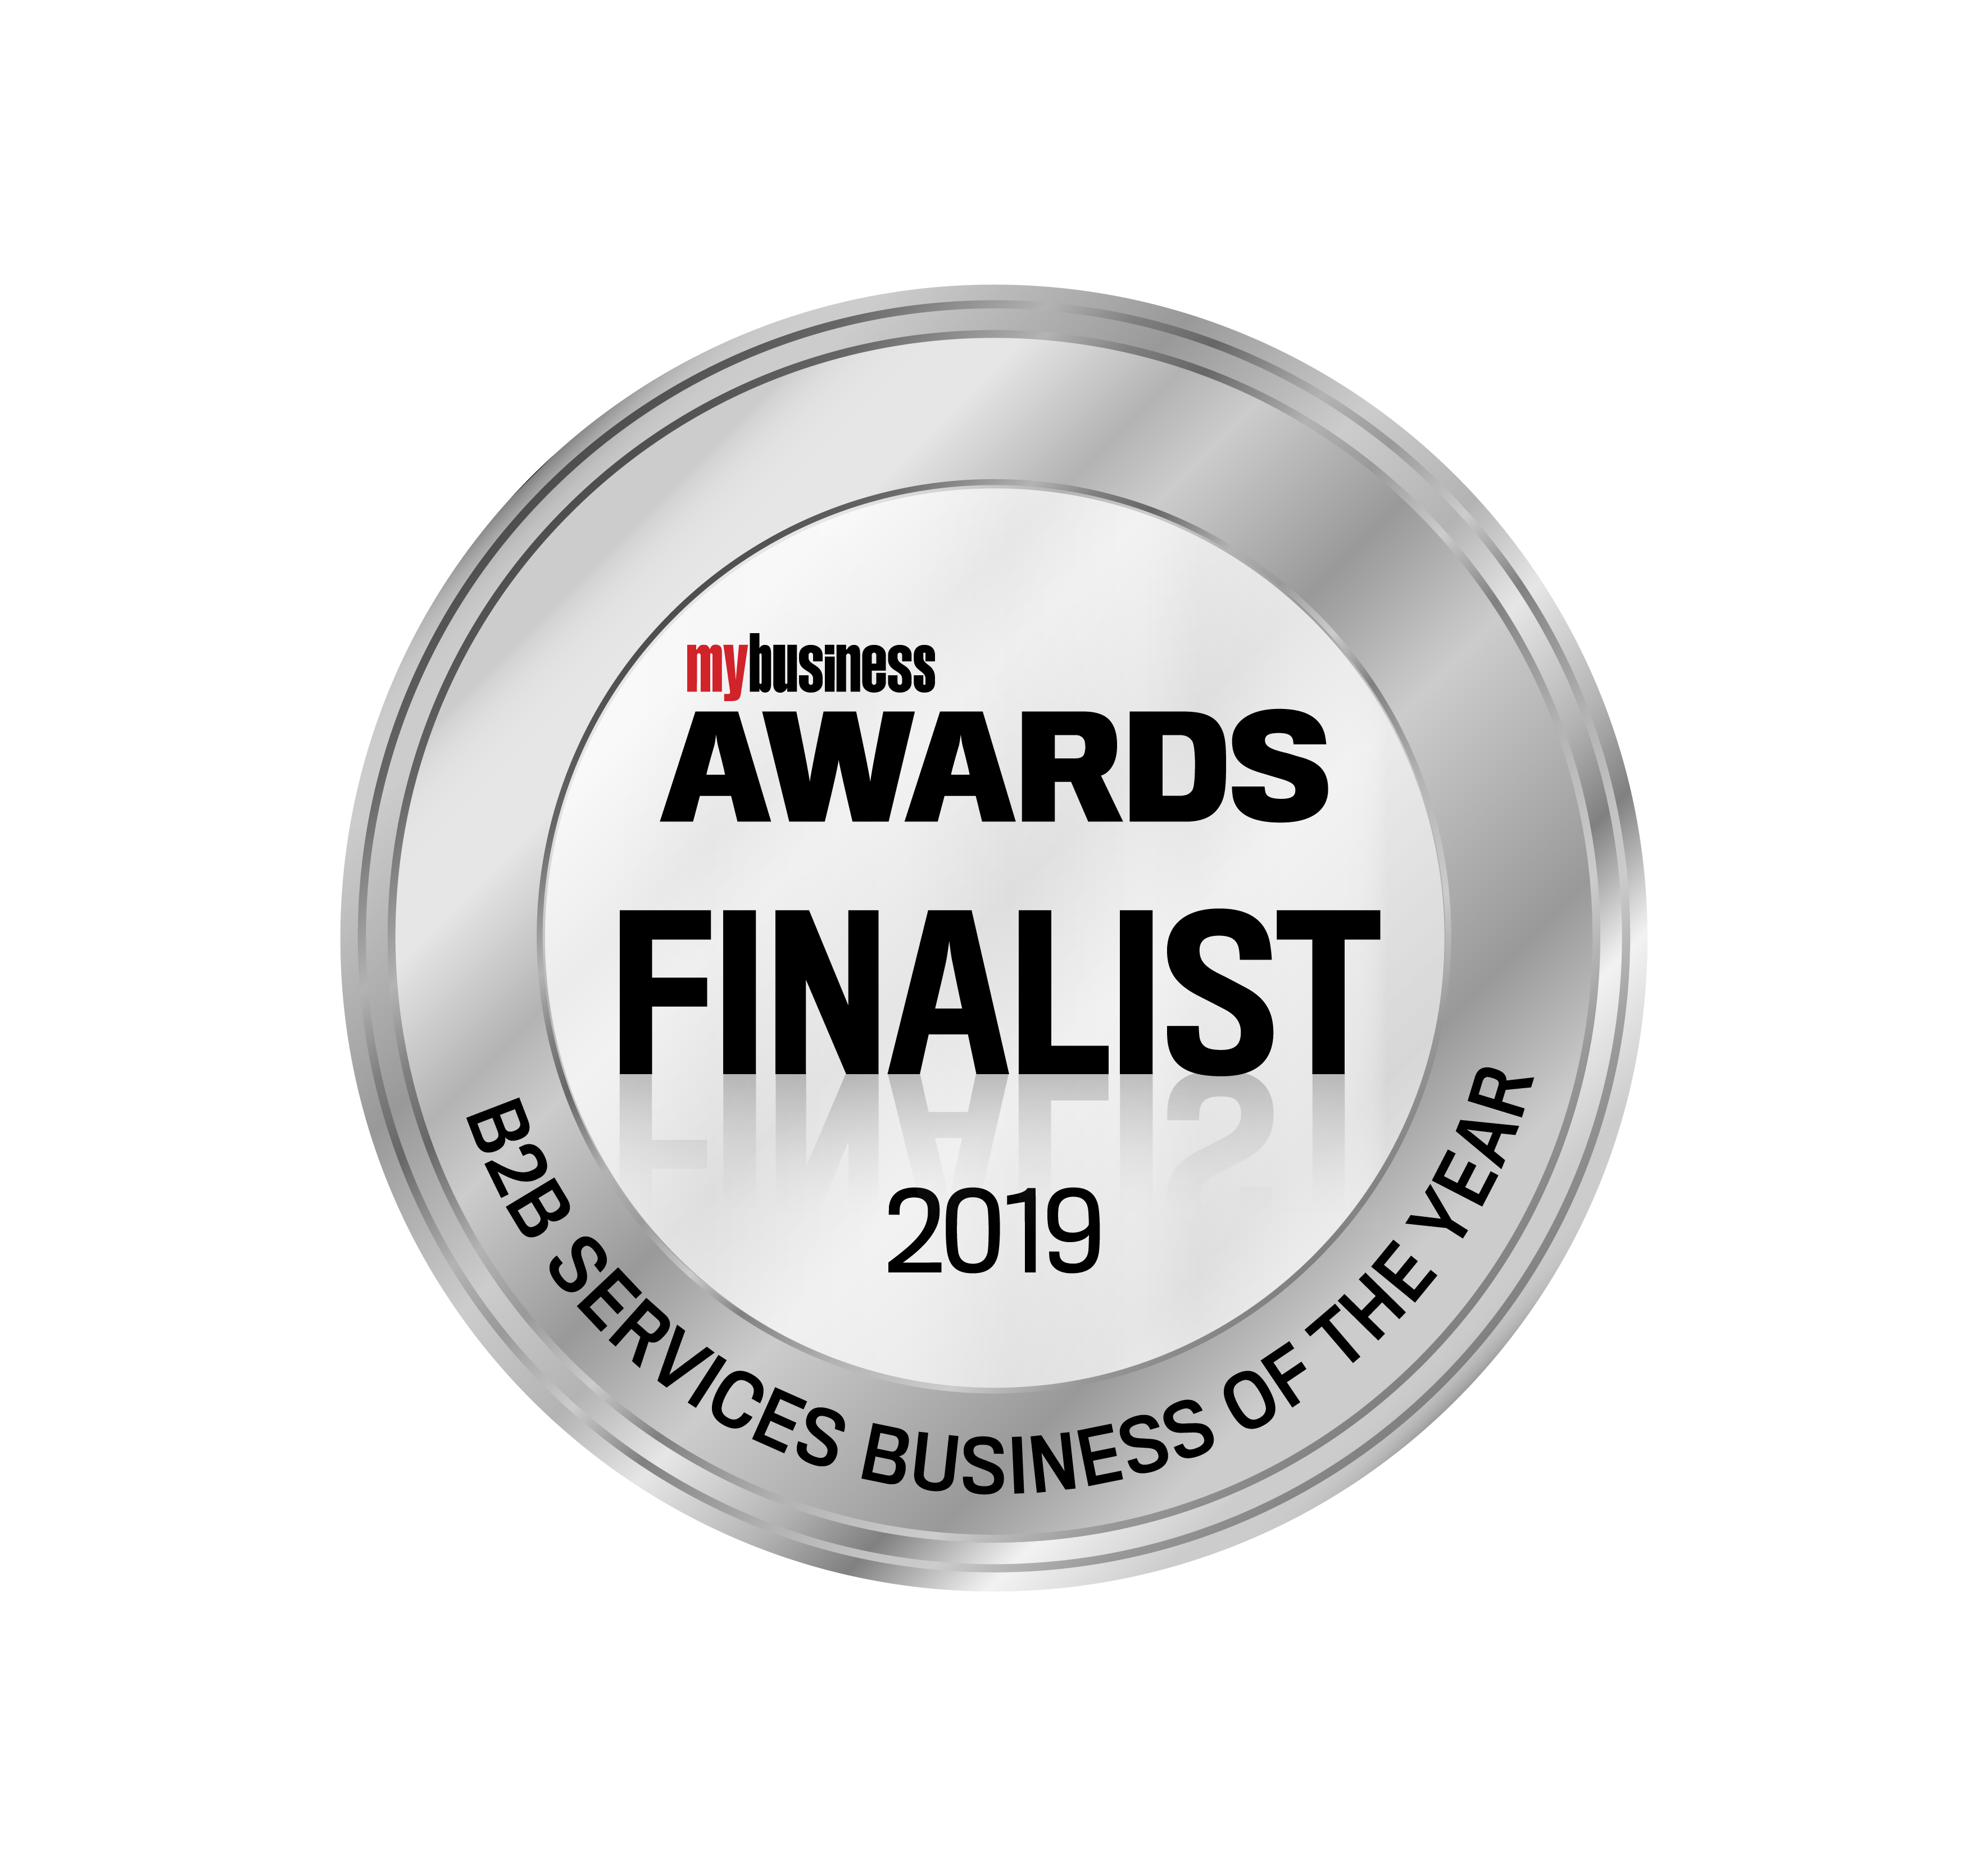 MB_SEAL_2019_Finalists_B2B SERVICES BUSINESS OF THE YEAR